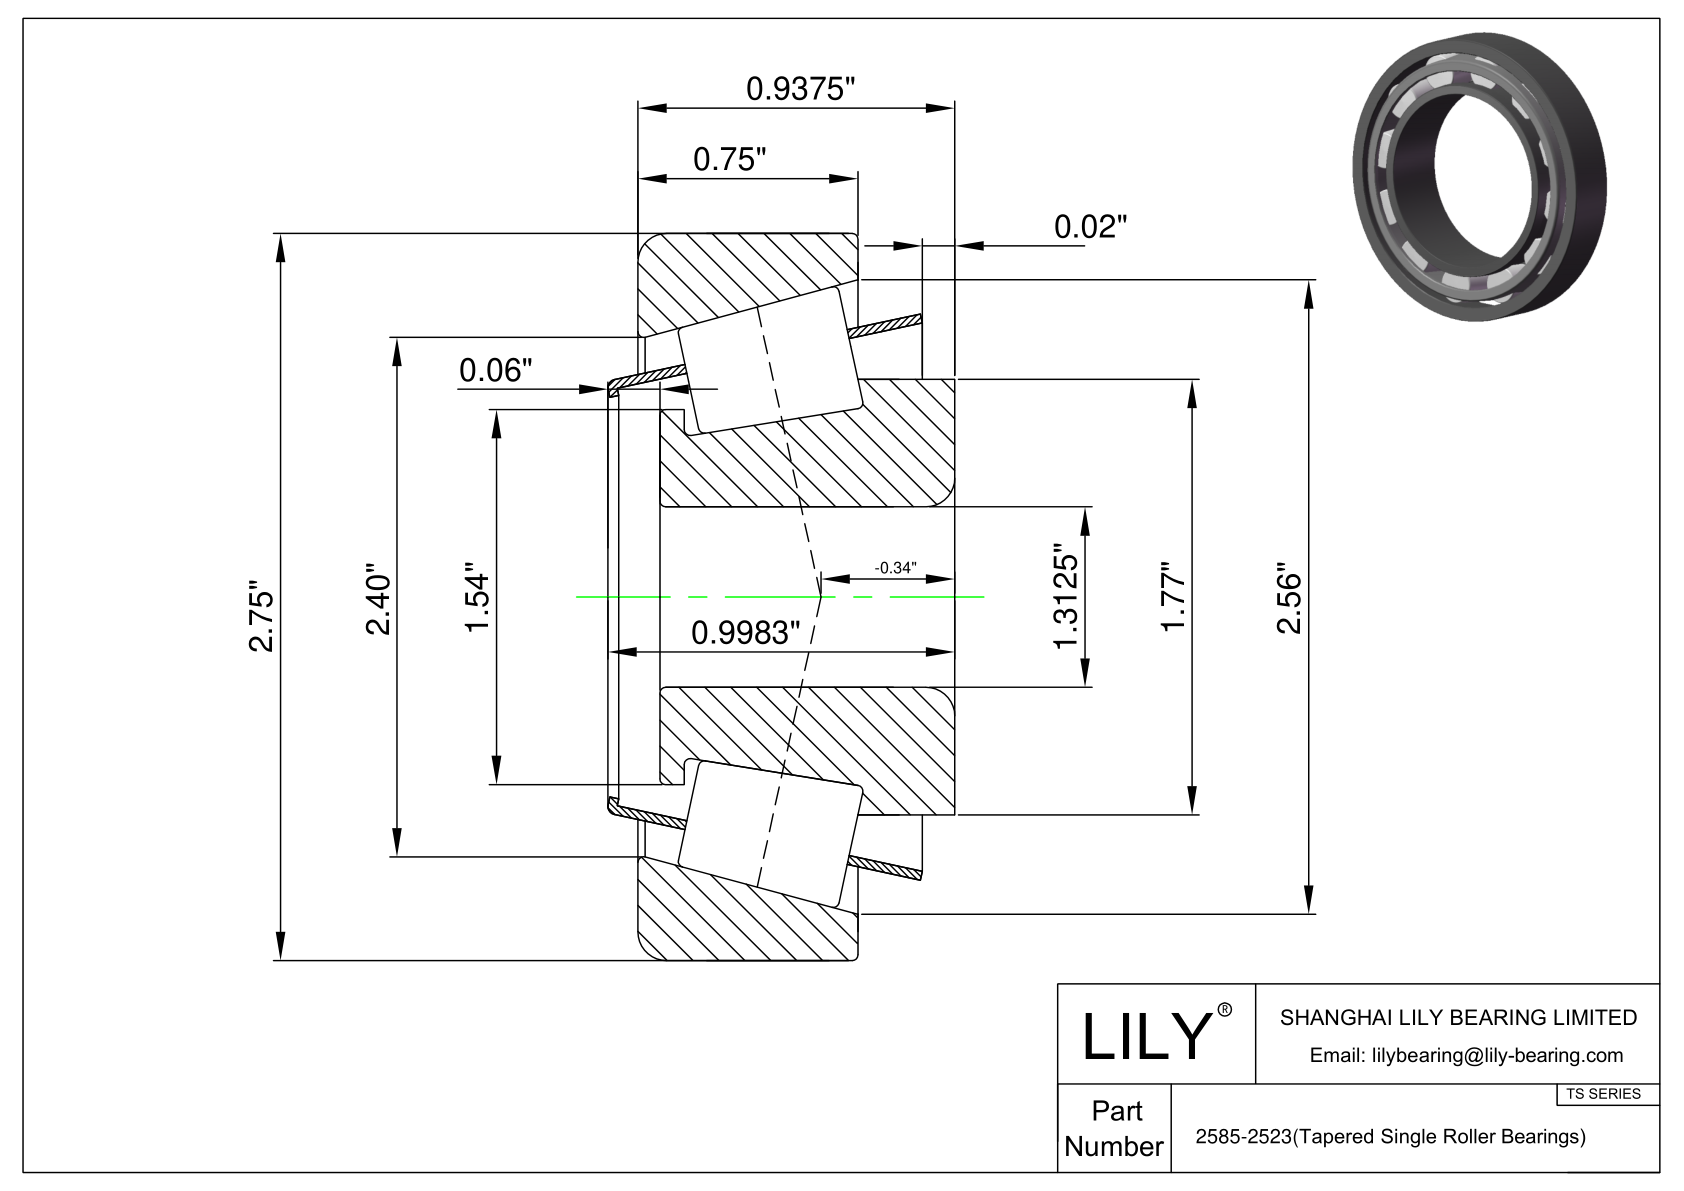 2585-2523 TS (Tapered Single Roller Bearings) (Imperial) cad drawing